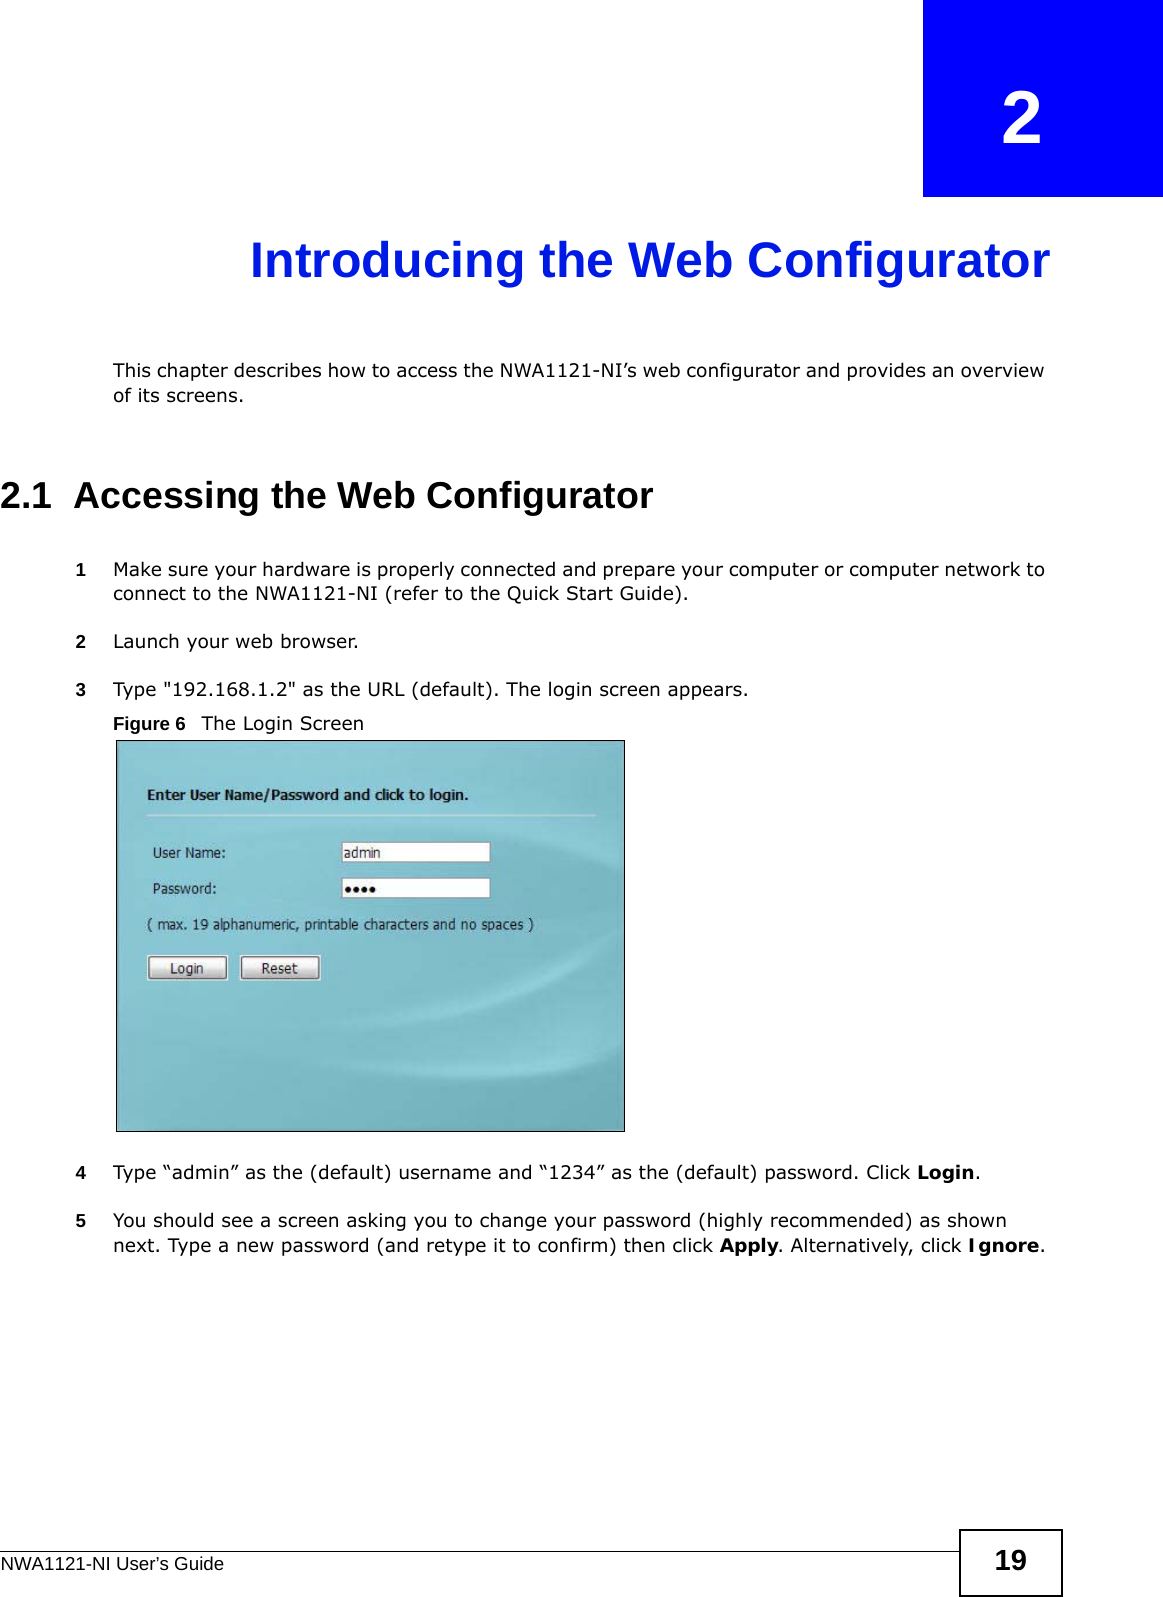 NWA1121-NI User’s Guide 19CHAPTER   2Introducing the Web ConfiguratorThis chapter describes how to access the NWA1121-NI’s web configurator and provides an overview of its screens. 2.1  Accessing the Web Configurator1Make sure your hardware is properly connected and prepare your computer or computer network to connect to the NWA1121-NI (refer to the Quick Start Guide).2Launch your web browser.3Type &quot;192.168.1.2&quot; as the URL (default). The login screen appears.Figure 6   The Login Screen4Type “admin” as the (default) username and “1234” as the (default) password. Click Login. 5You should see a screen asking you to change your password (highly recommended) as shown next. Type a new password (and retype it to confirm) then click Apply. Alternatively, click Ignore.